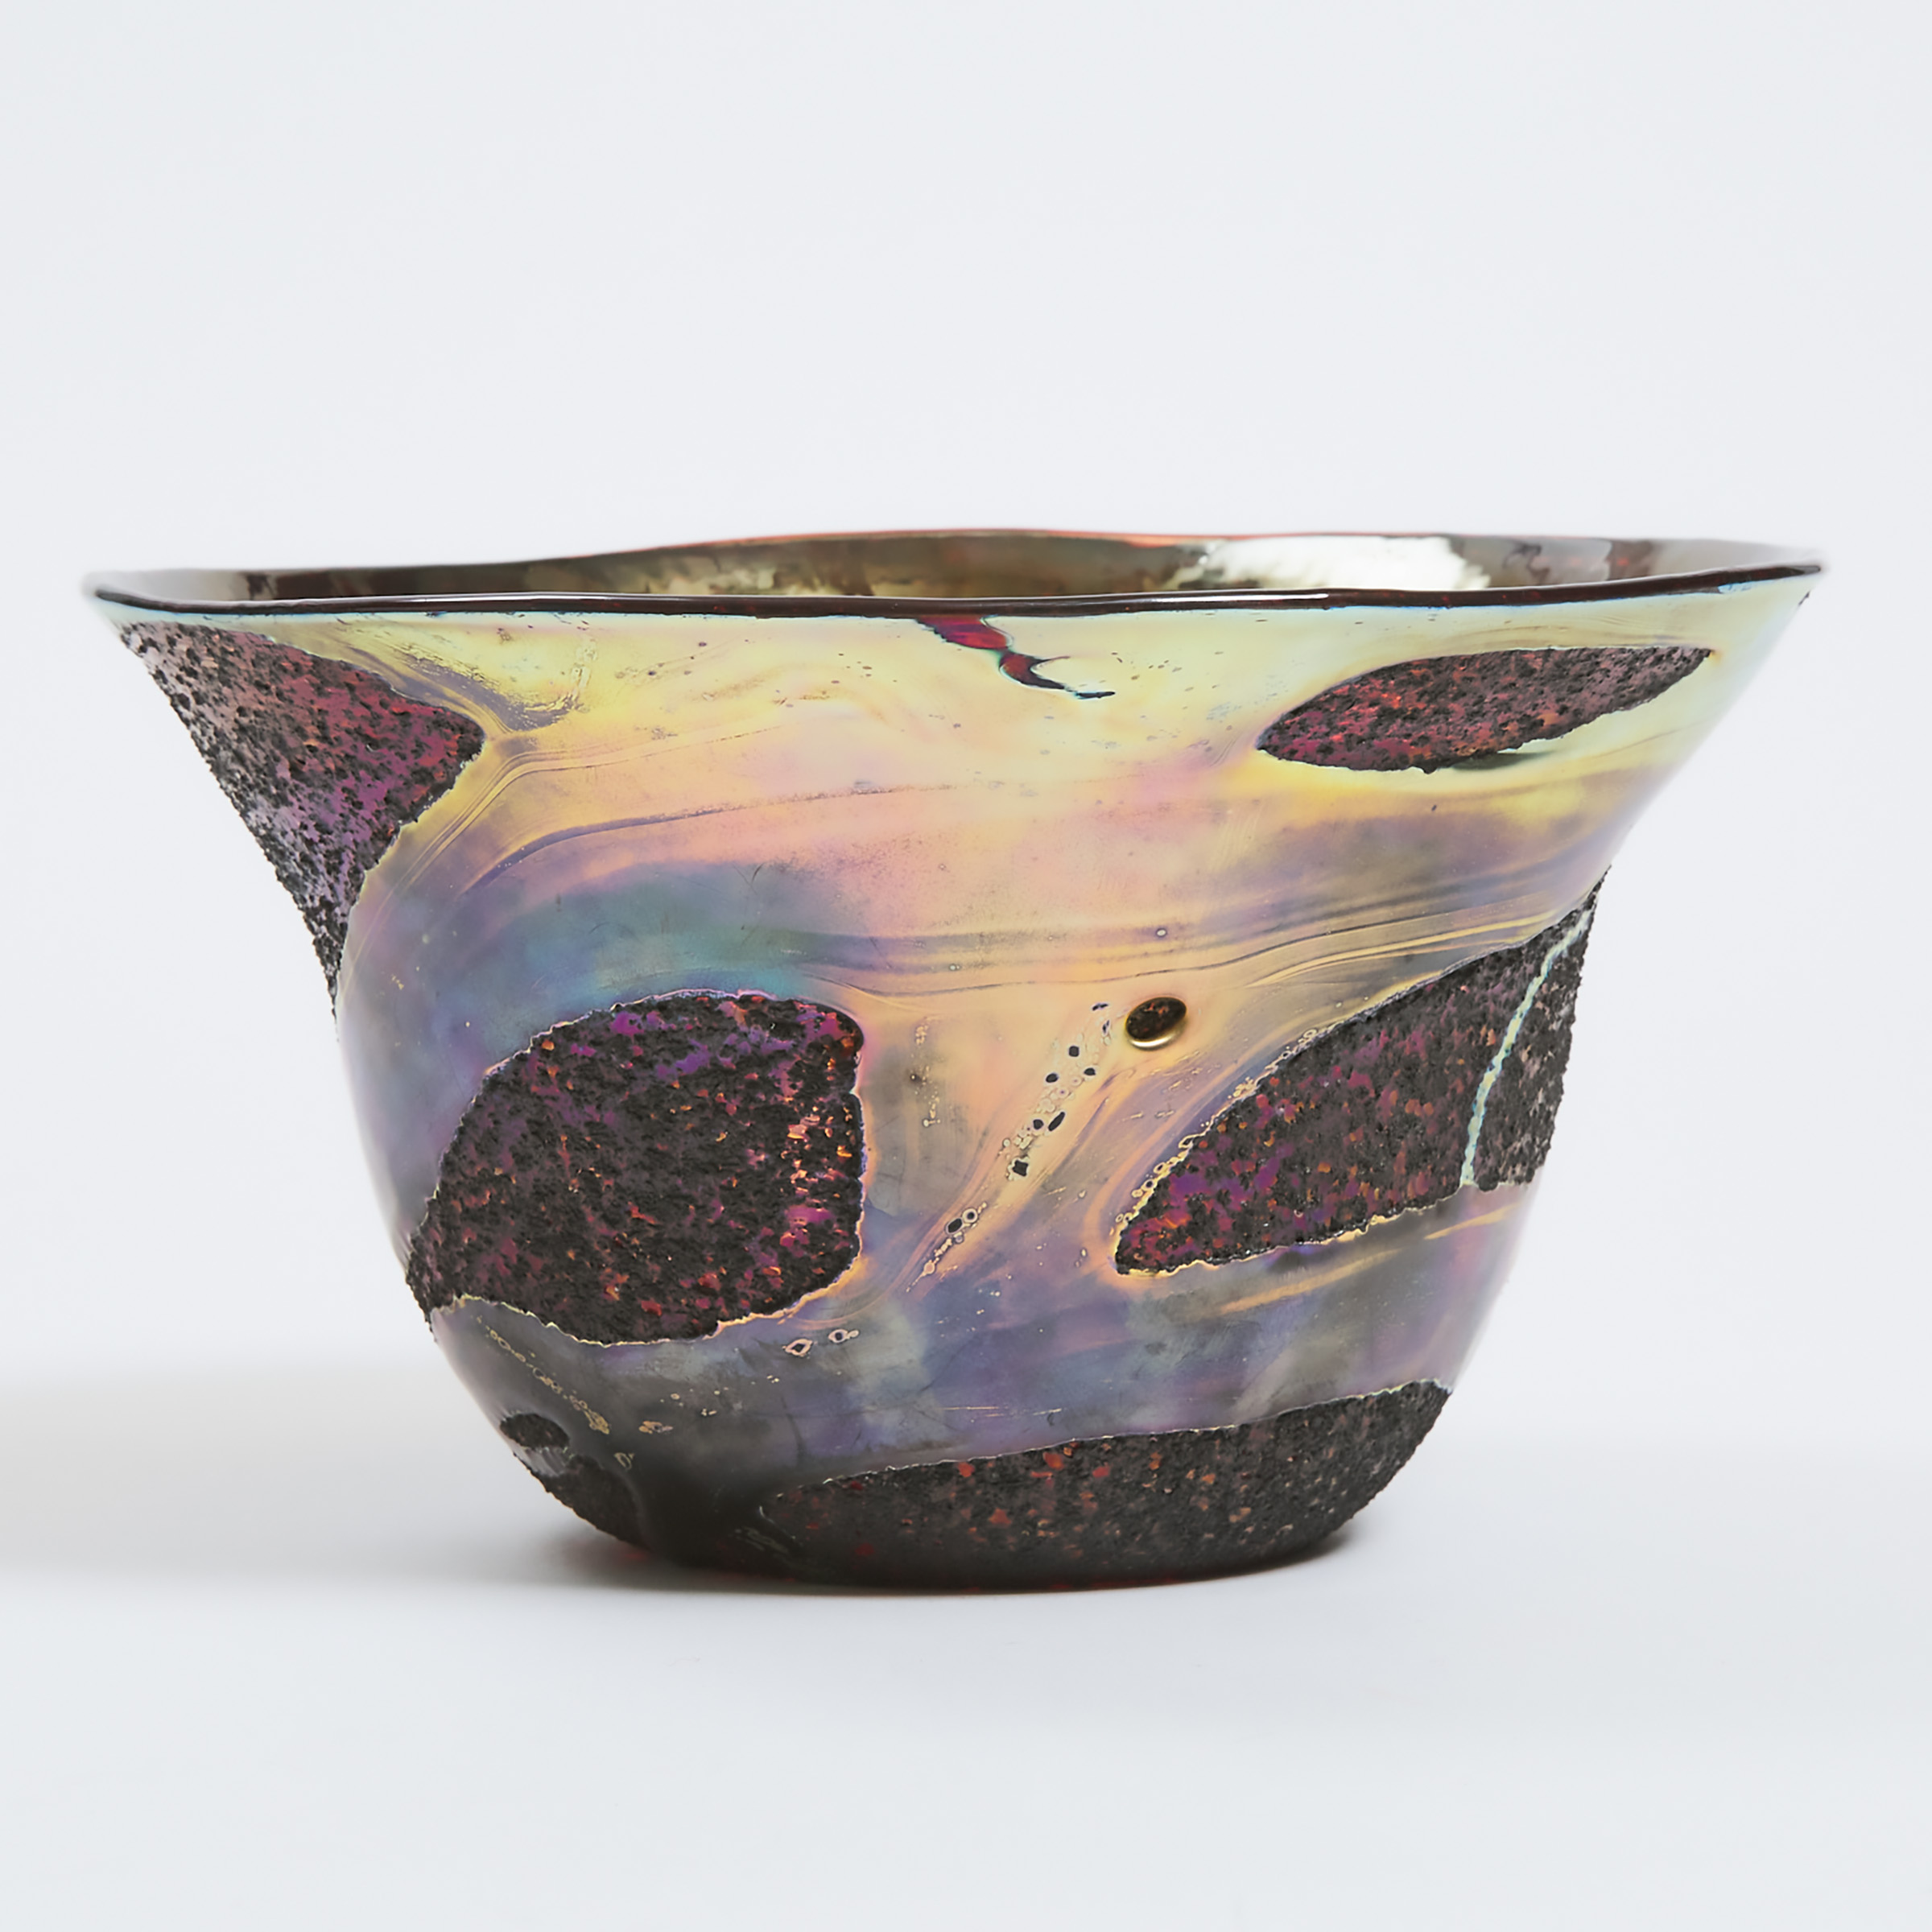 Charles Lotton (American, 1935-2021), Iridescent and Textured Glass Bowl, 1988